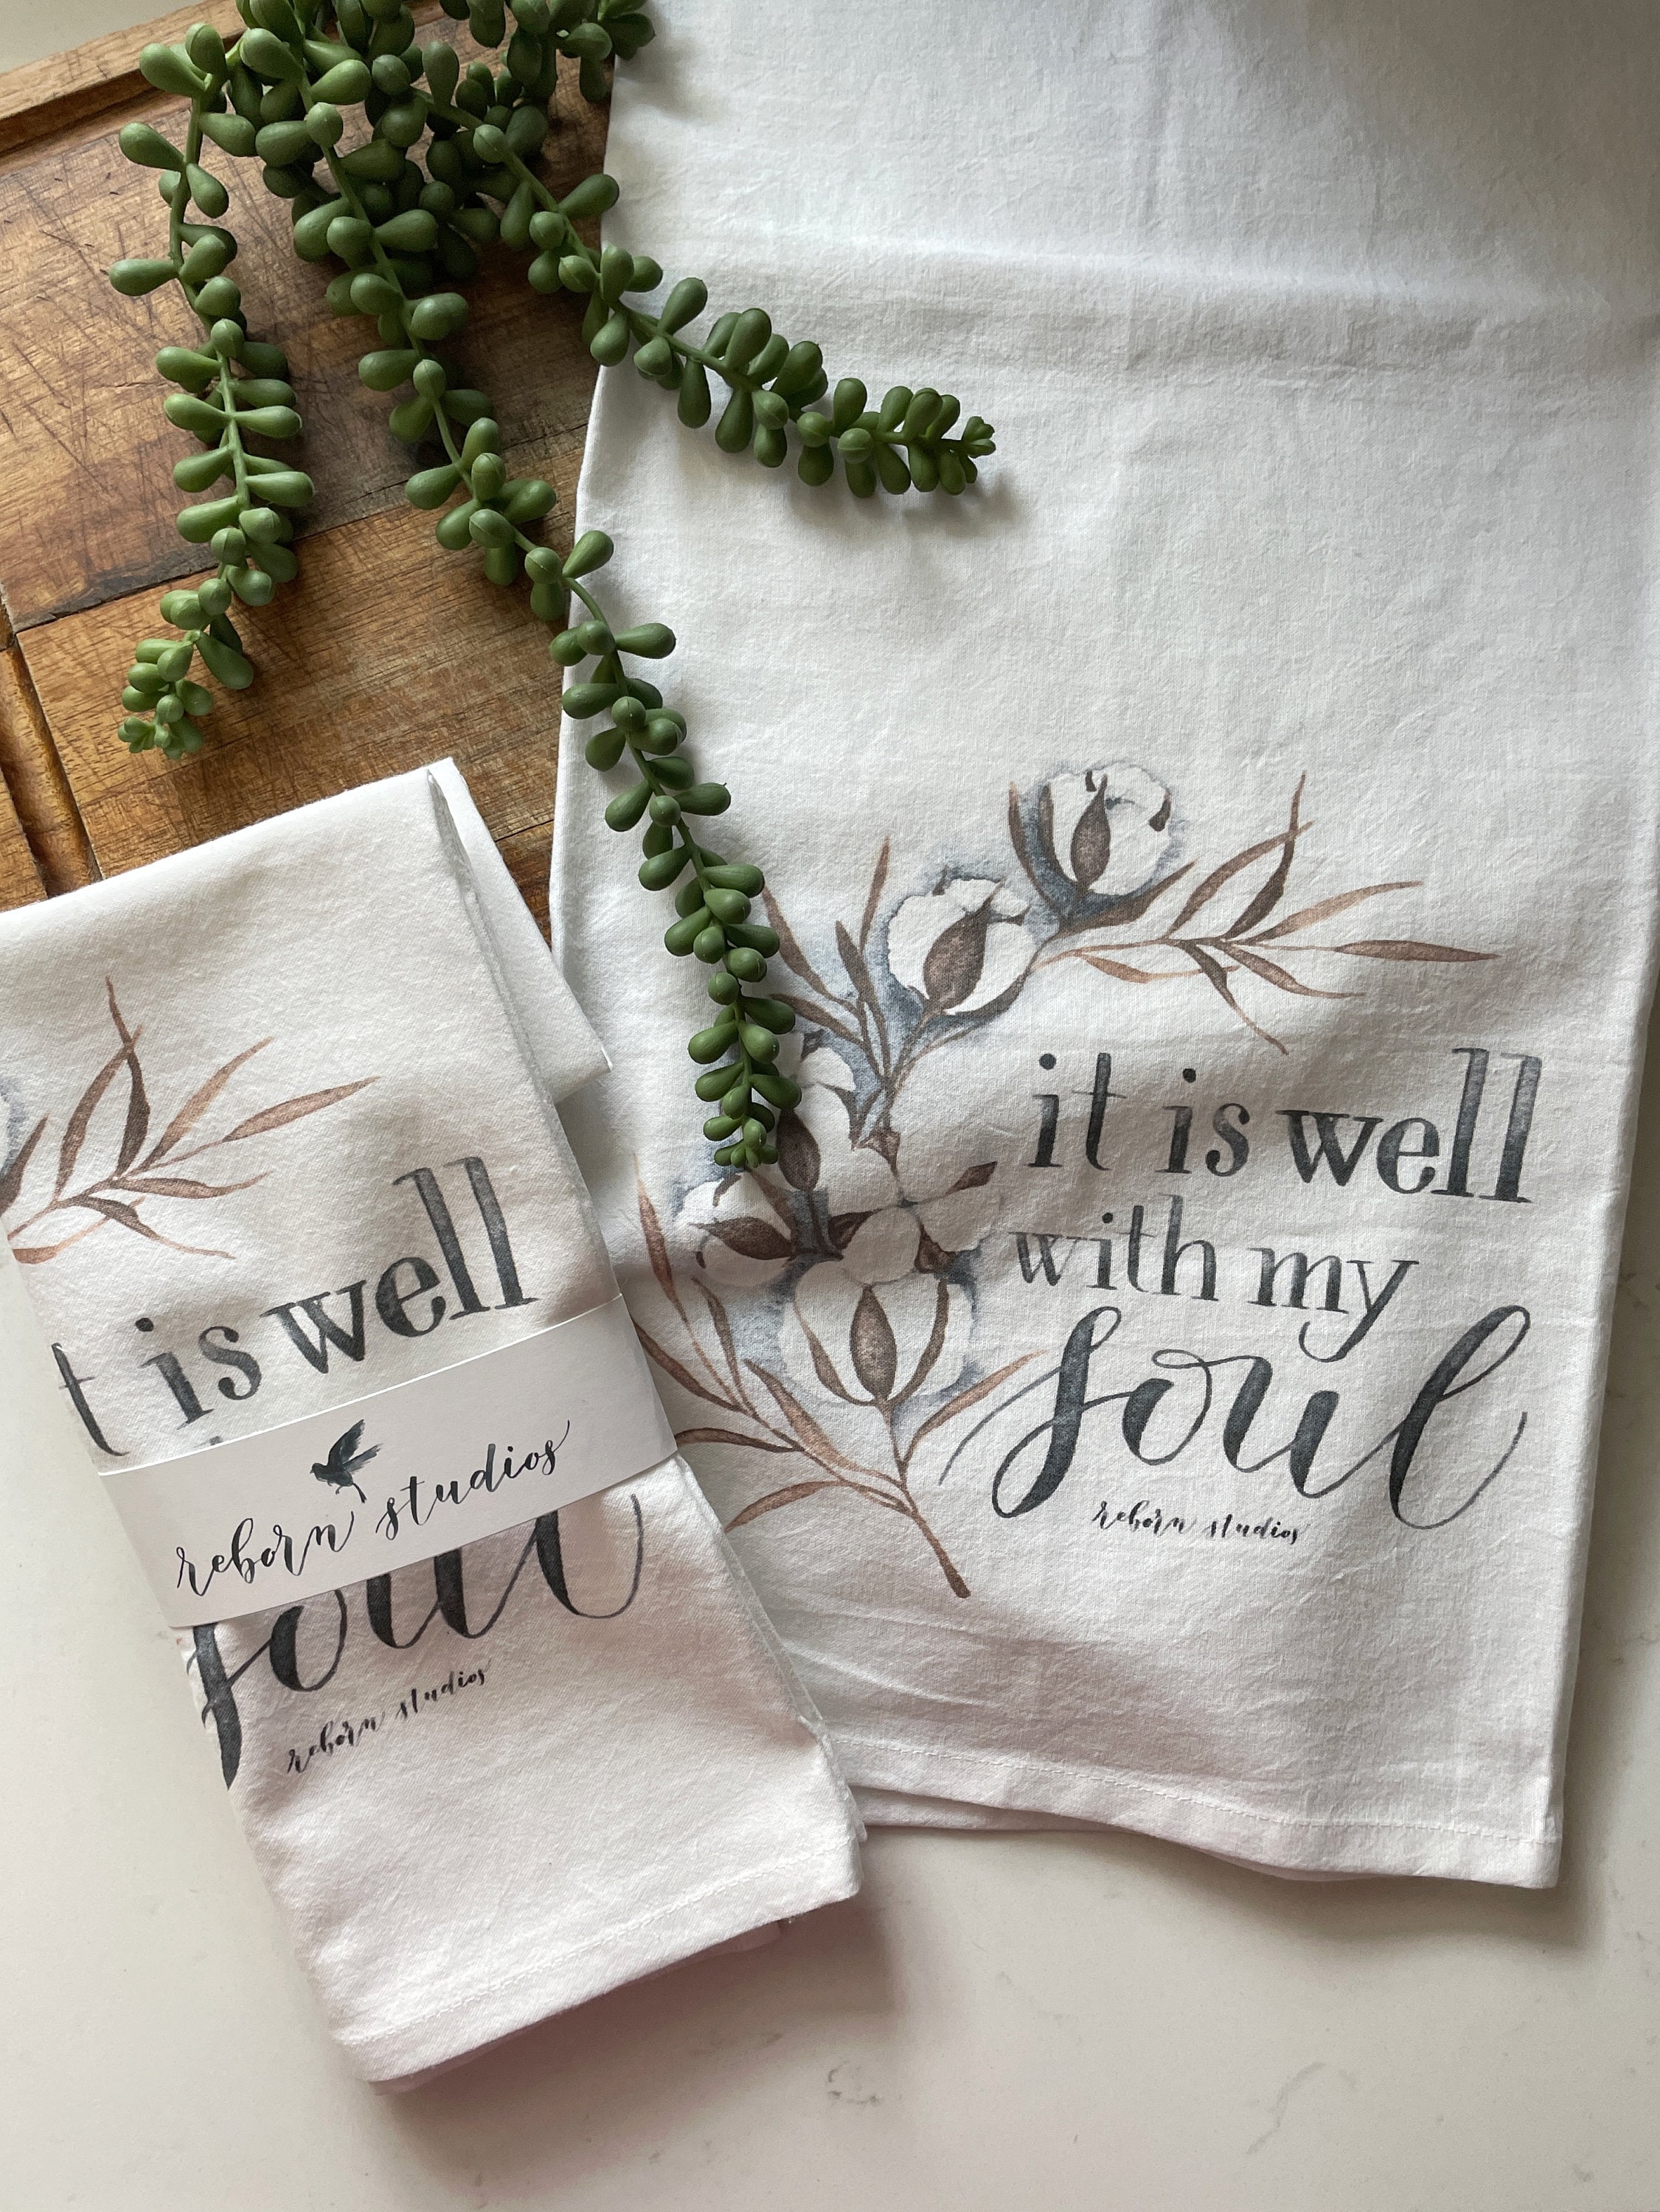 Cute Kitchen Towels, Fun Dish Towels with Faith, Blessed, Family, Love & Dreams Theme, 5 Flour Sack Towels, White